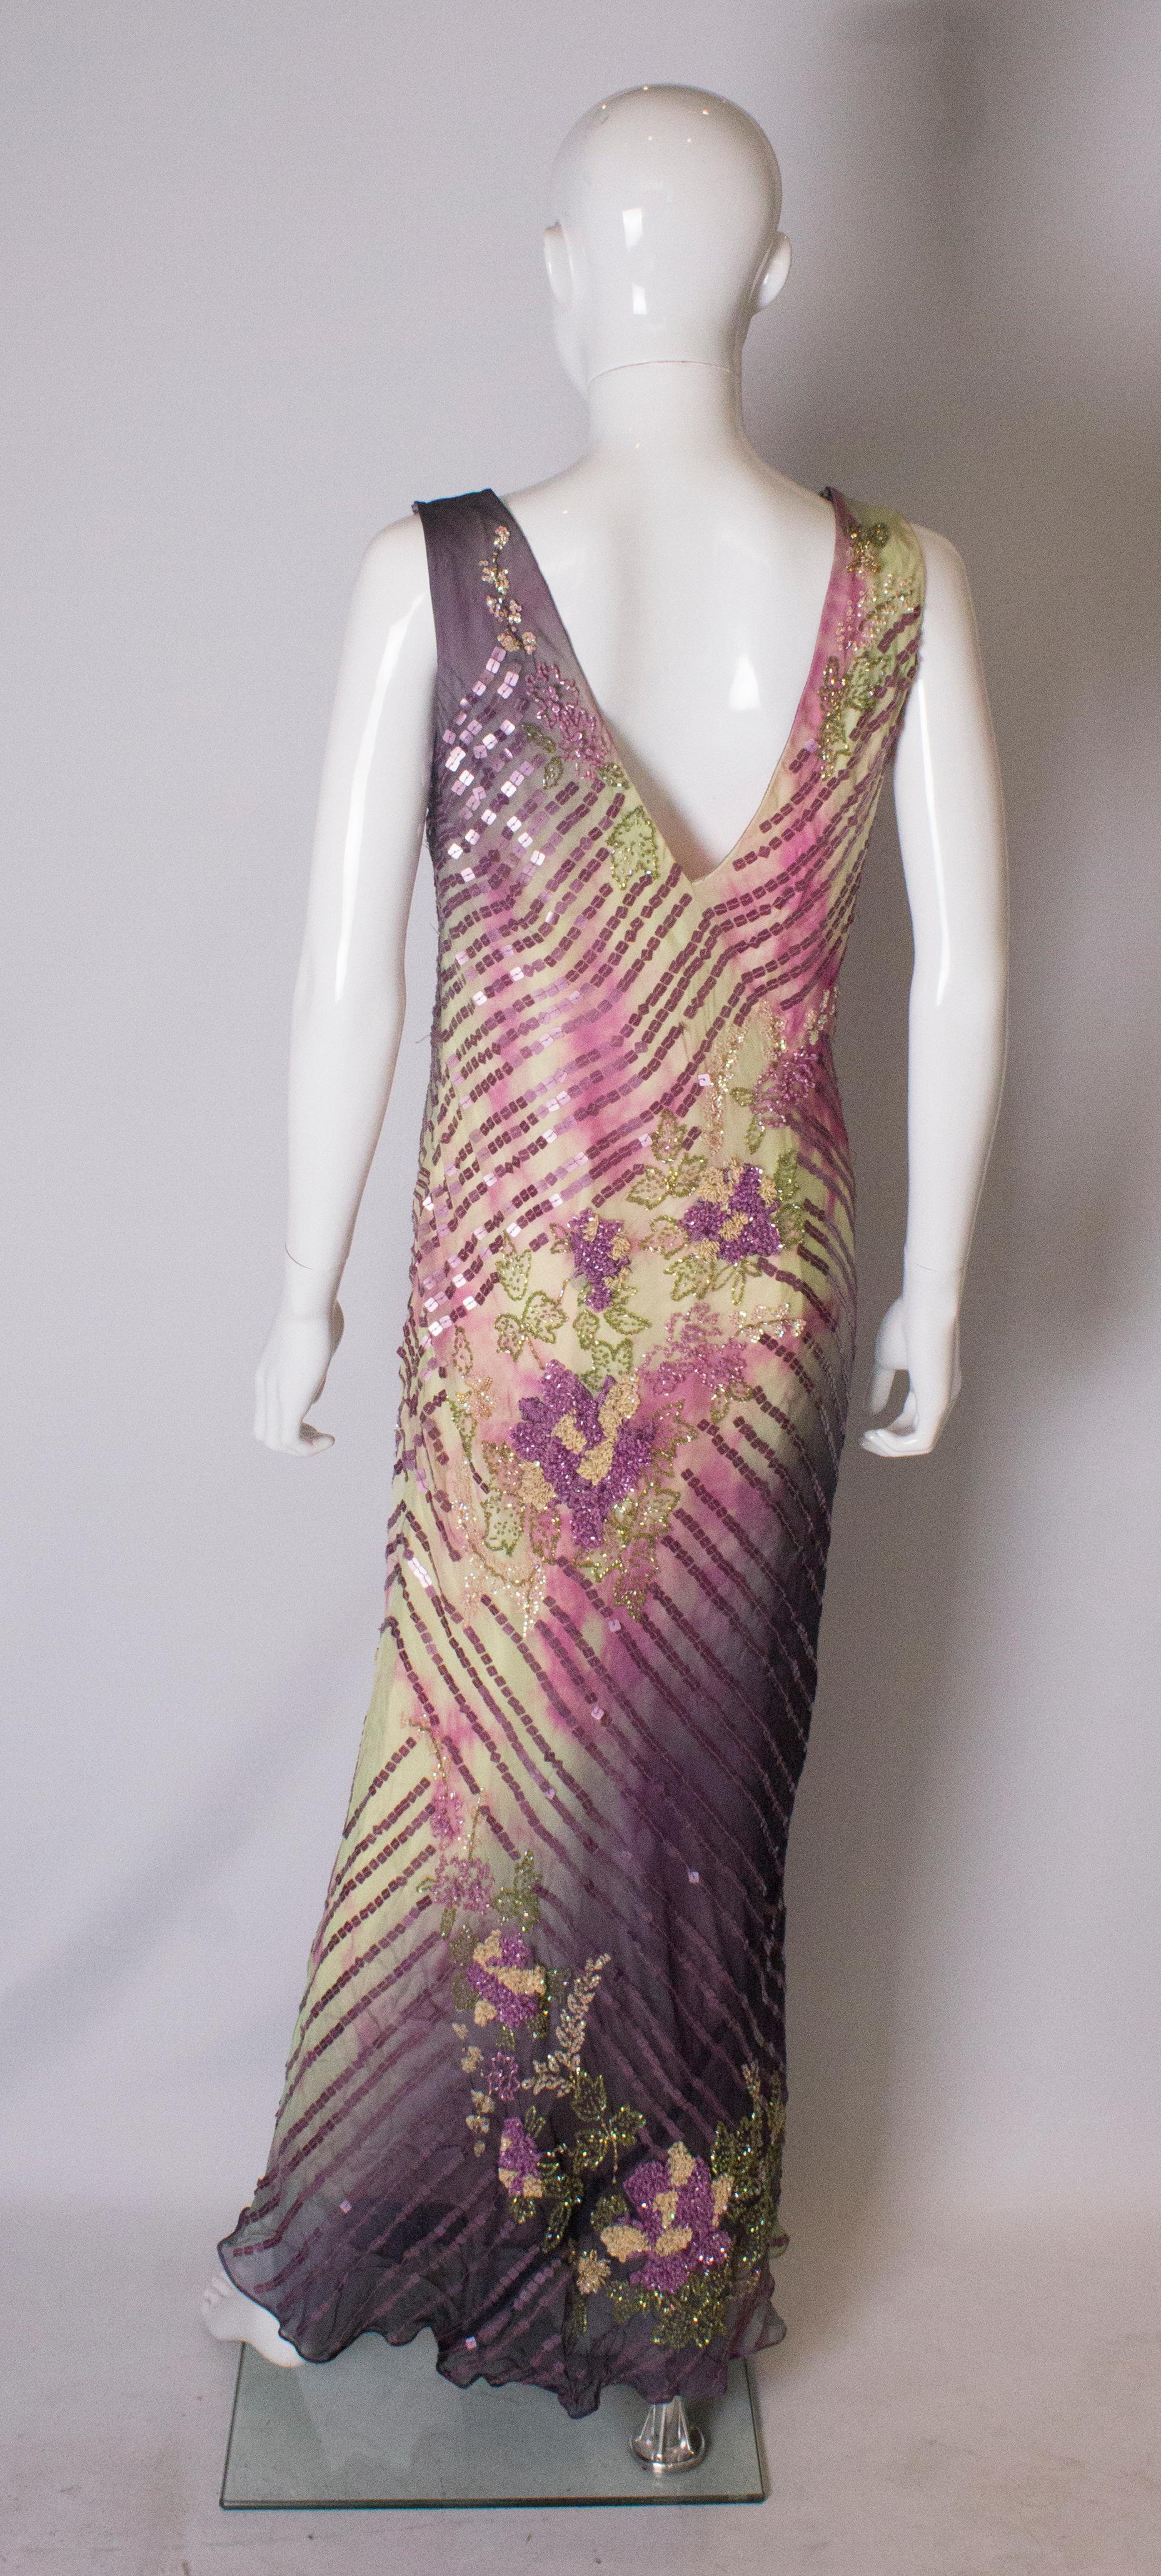 Beaded Vintage Gown with Tie Die Effect For Sale 2